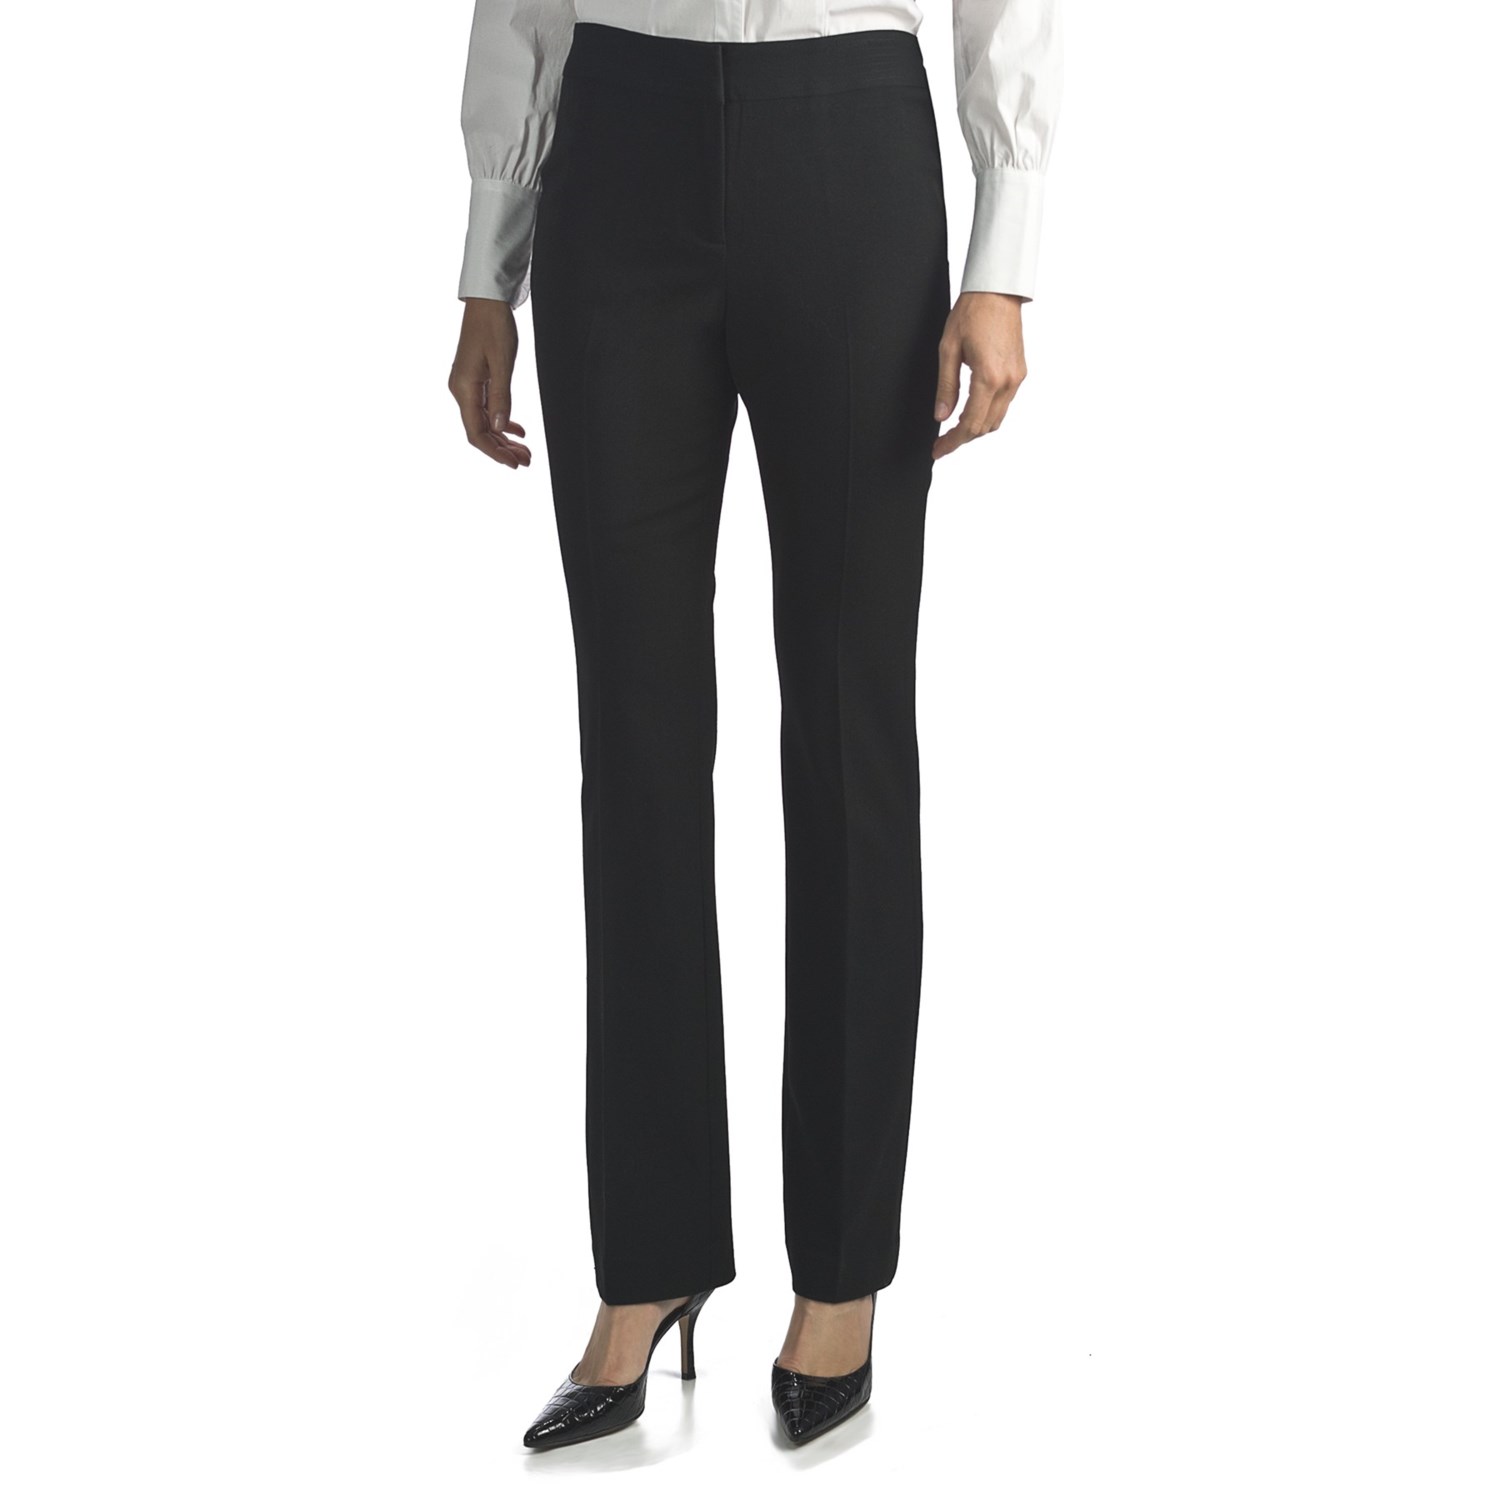 Atelier Luxe Barely Boot Dress Pants (For Women) 4994Y - Save 79%